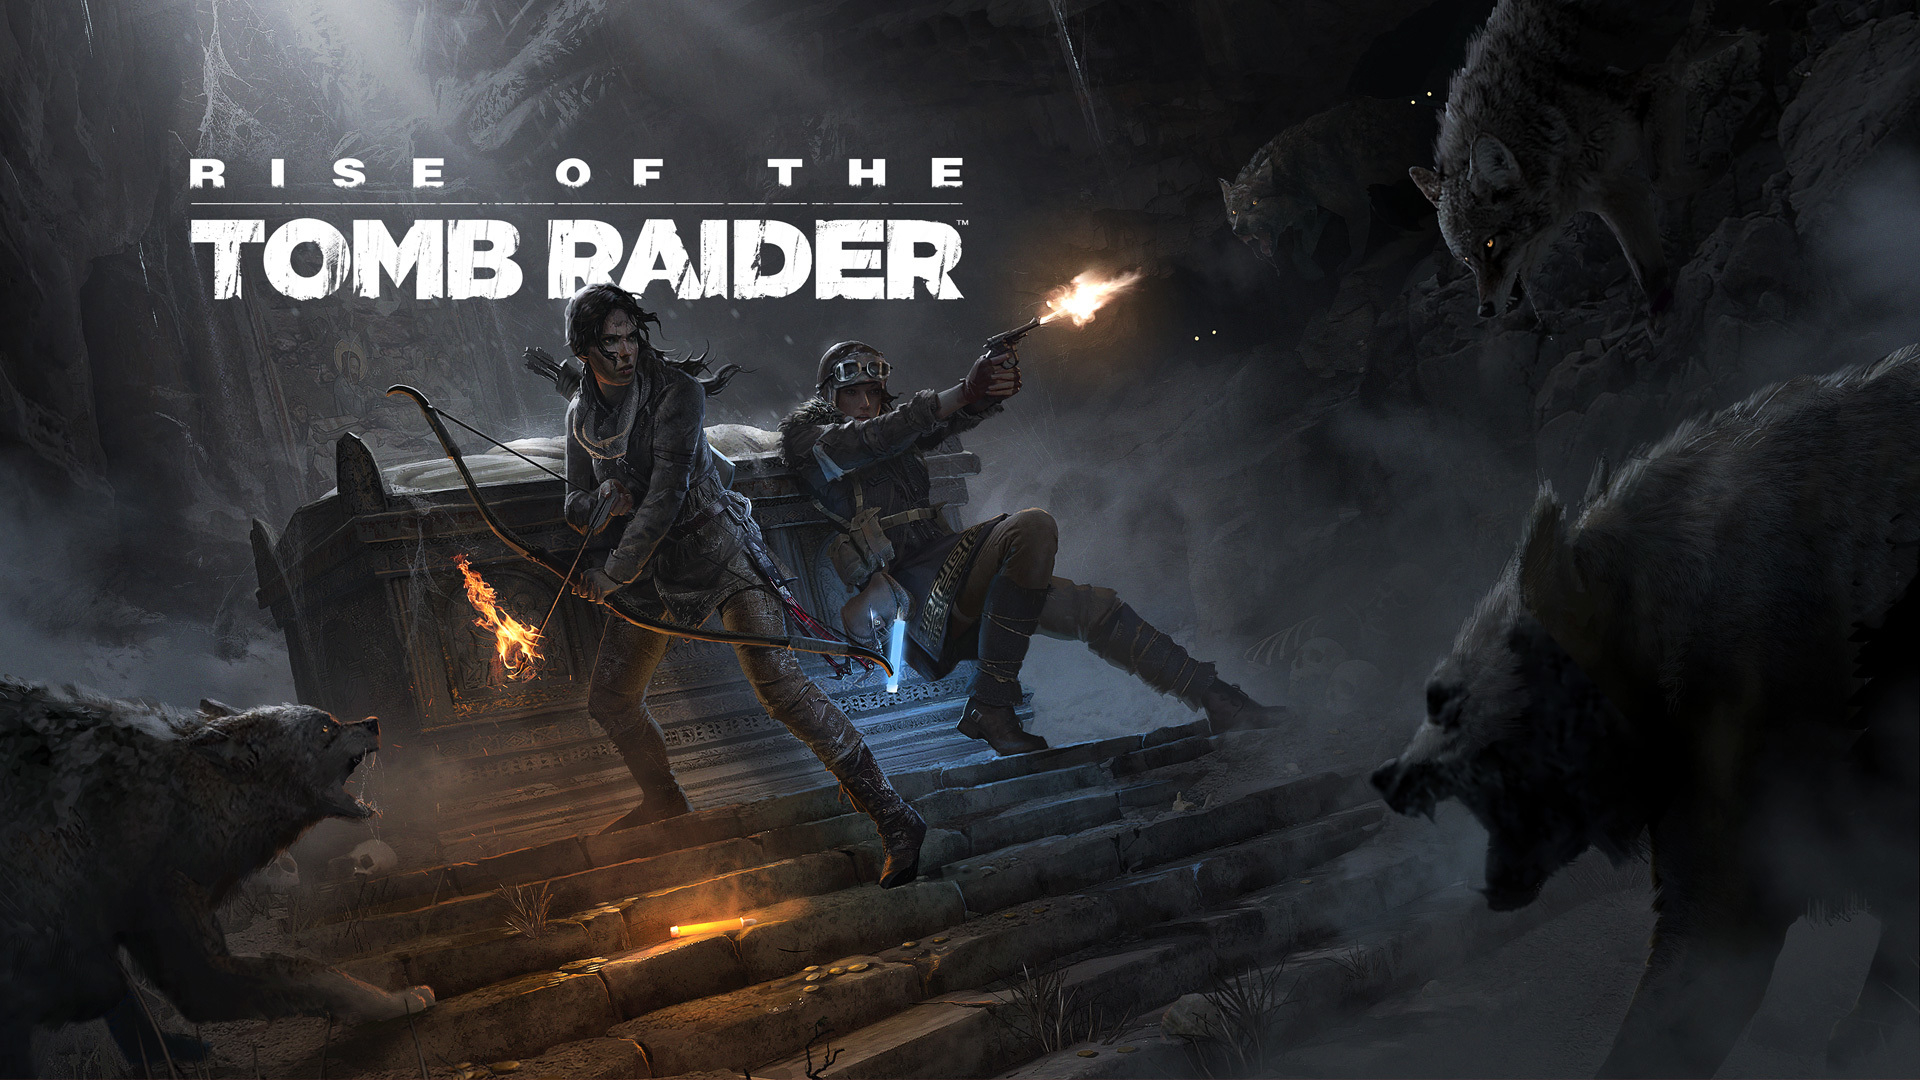 1920x1080 140+ Rise of the Tomb Raider HD Wallpapers and Backgrounds